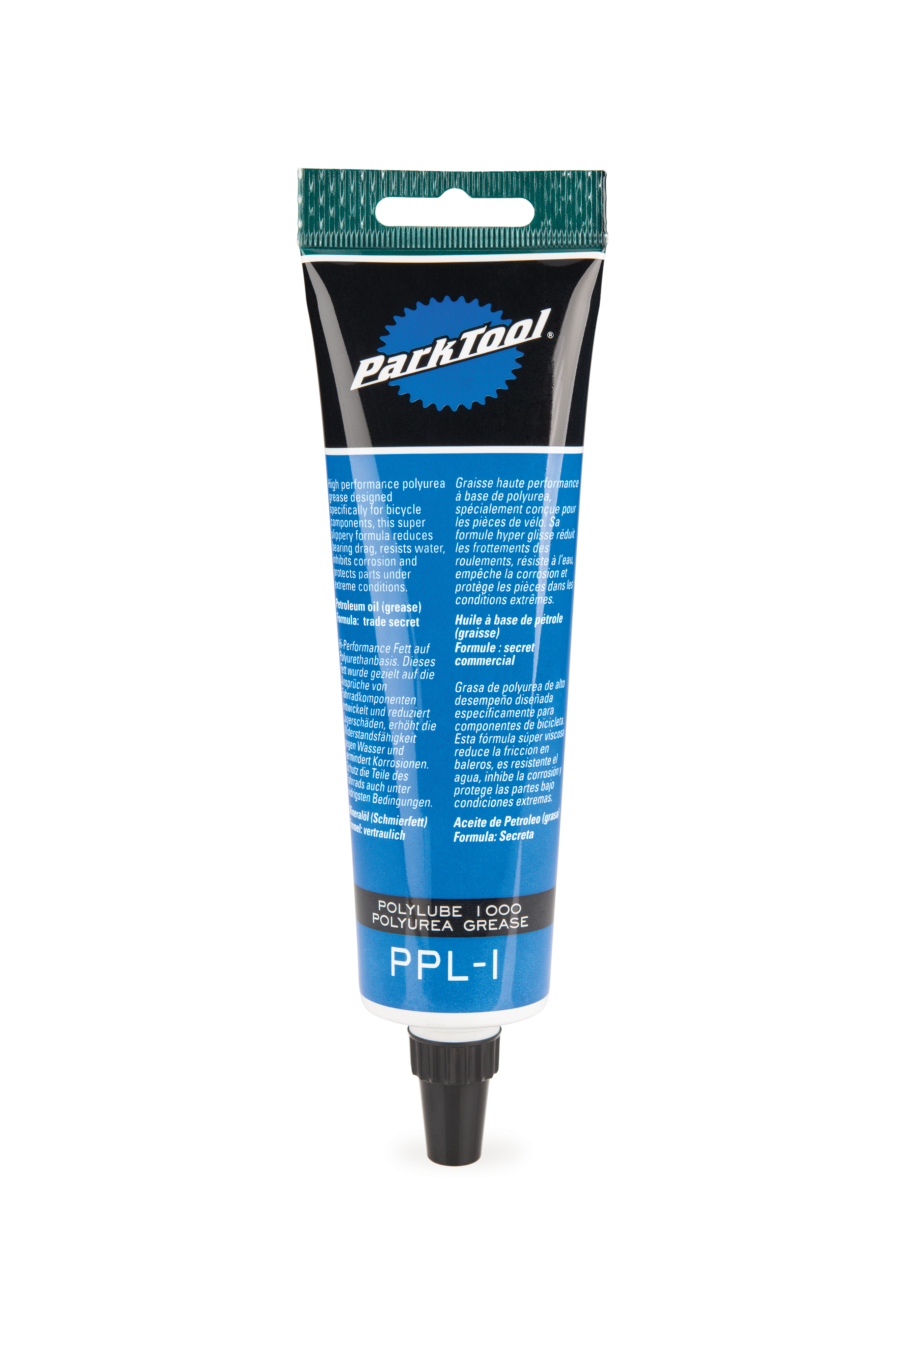 The Park Tool PPL-1 PolyLube 1000™ Lubricant (Tube), enlarged